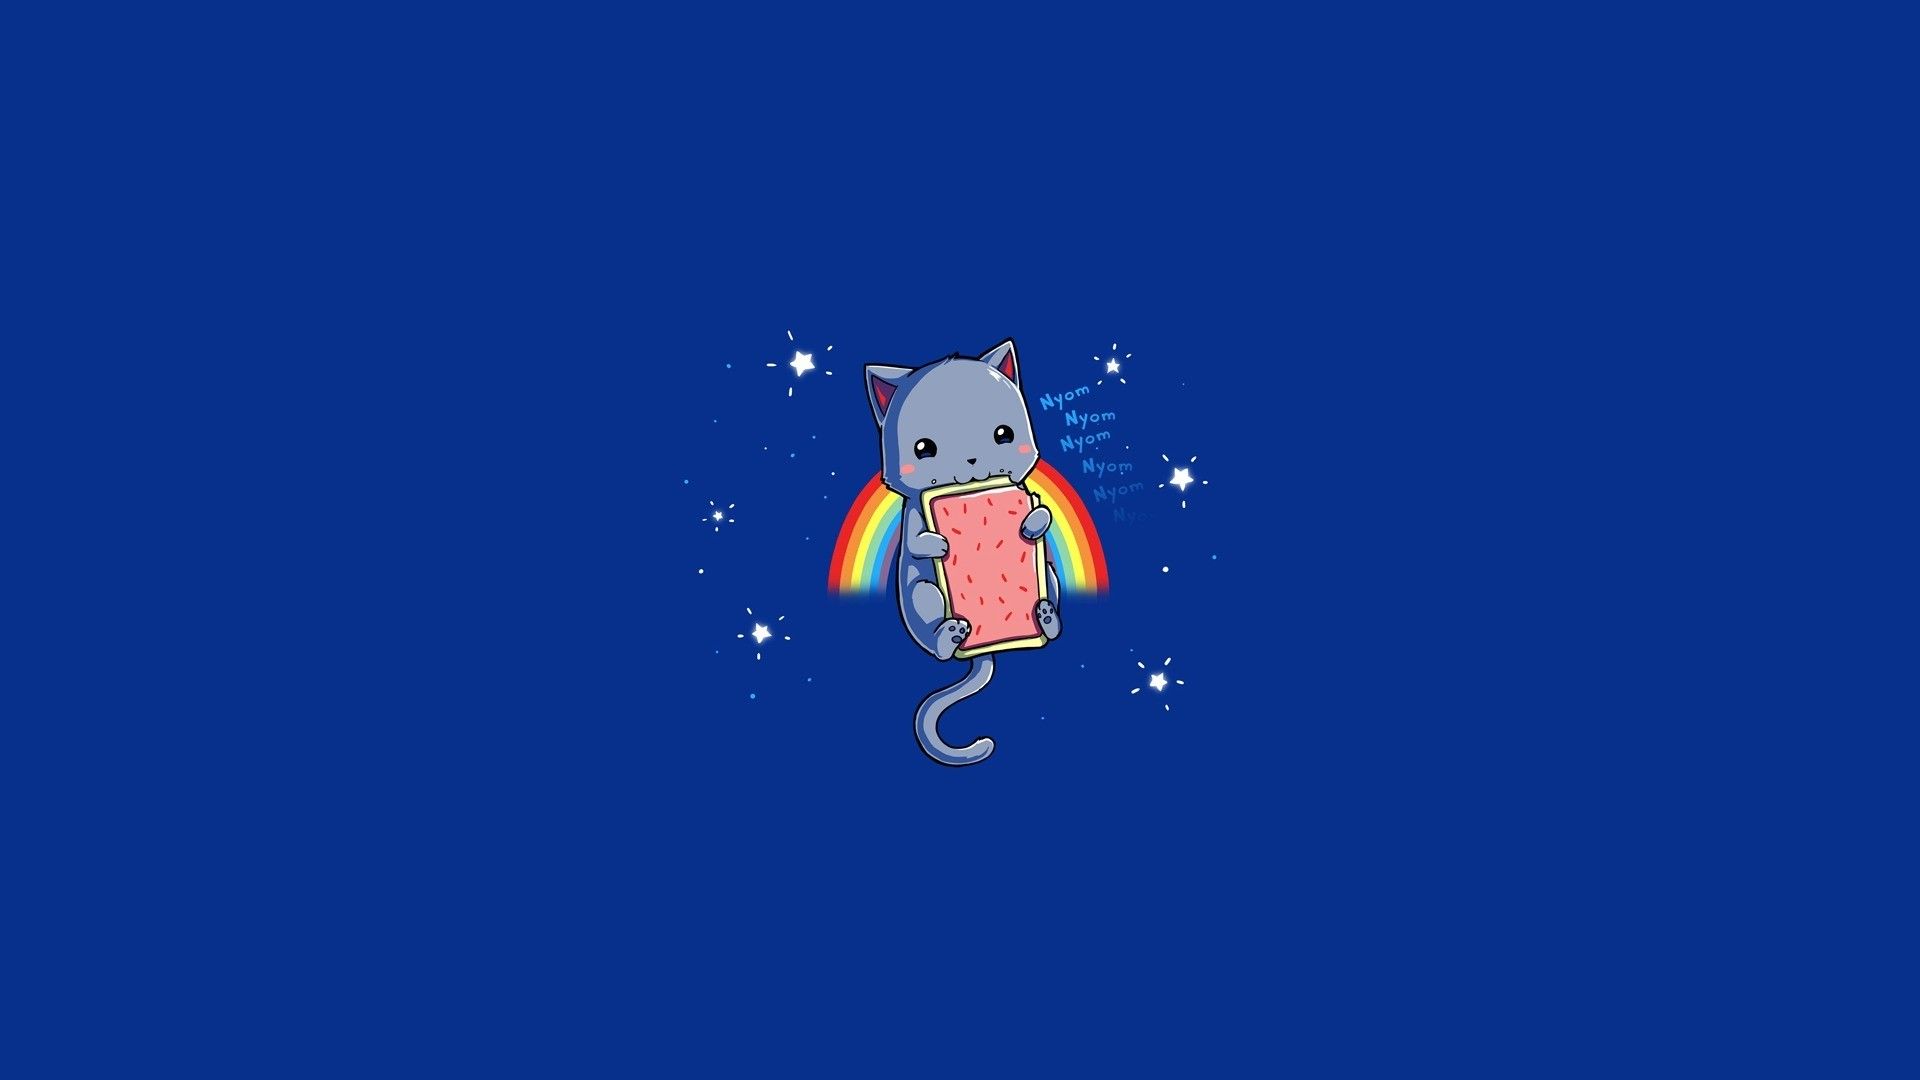 4 Nyan Cat HD Wallpapers | Backgrounds - Wallpaper Abyss